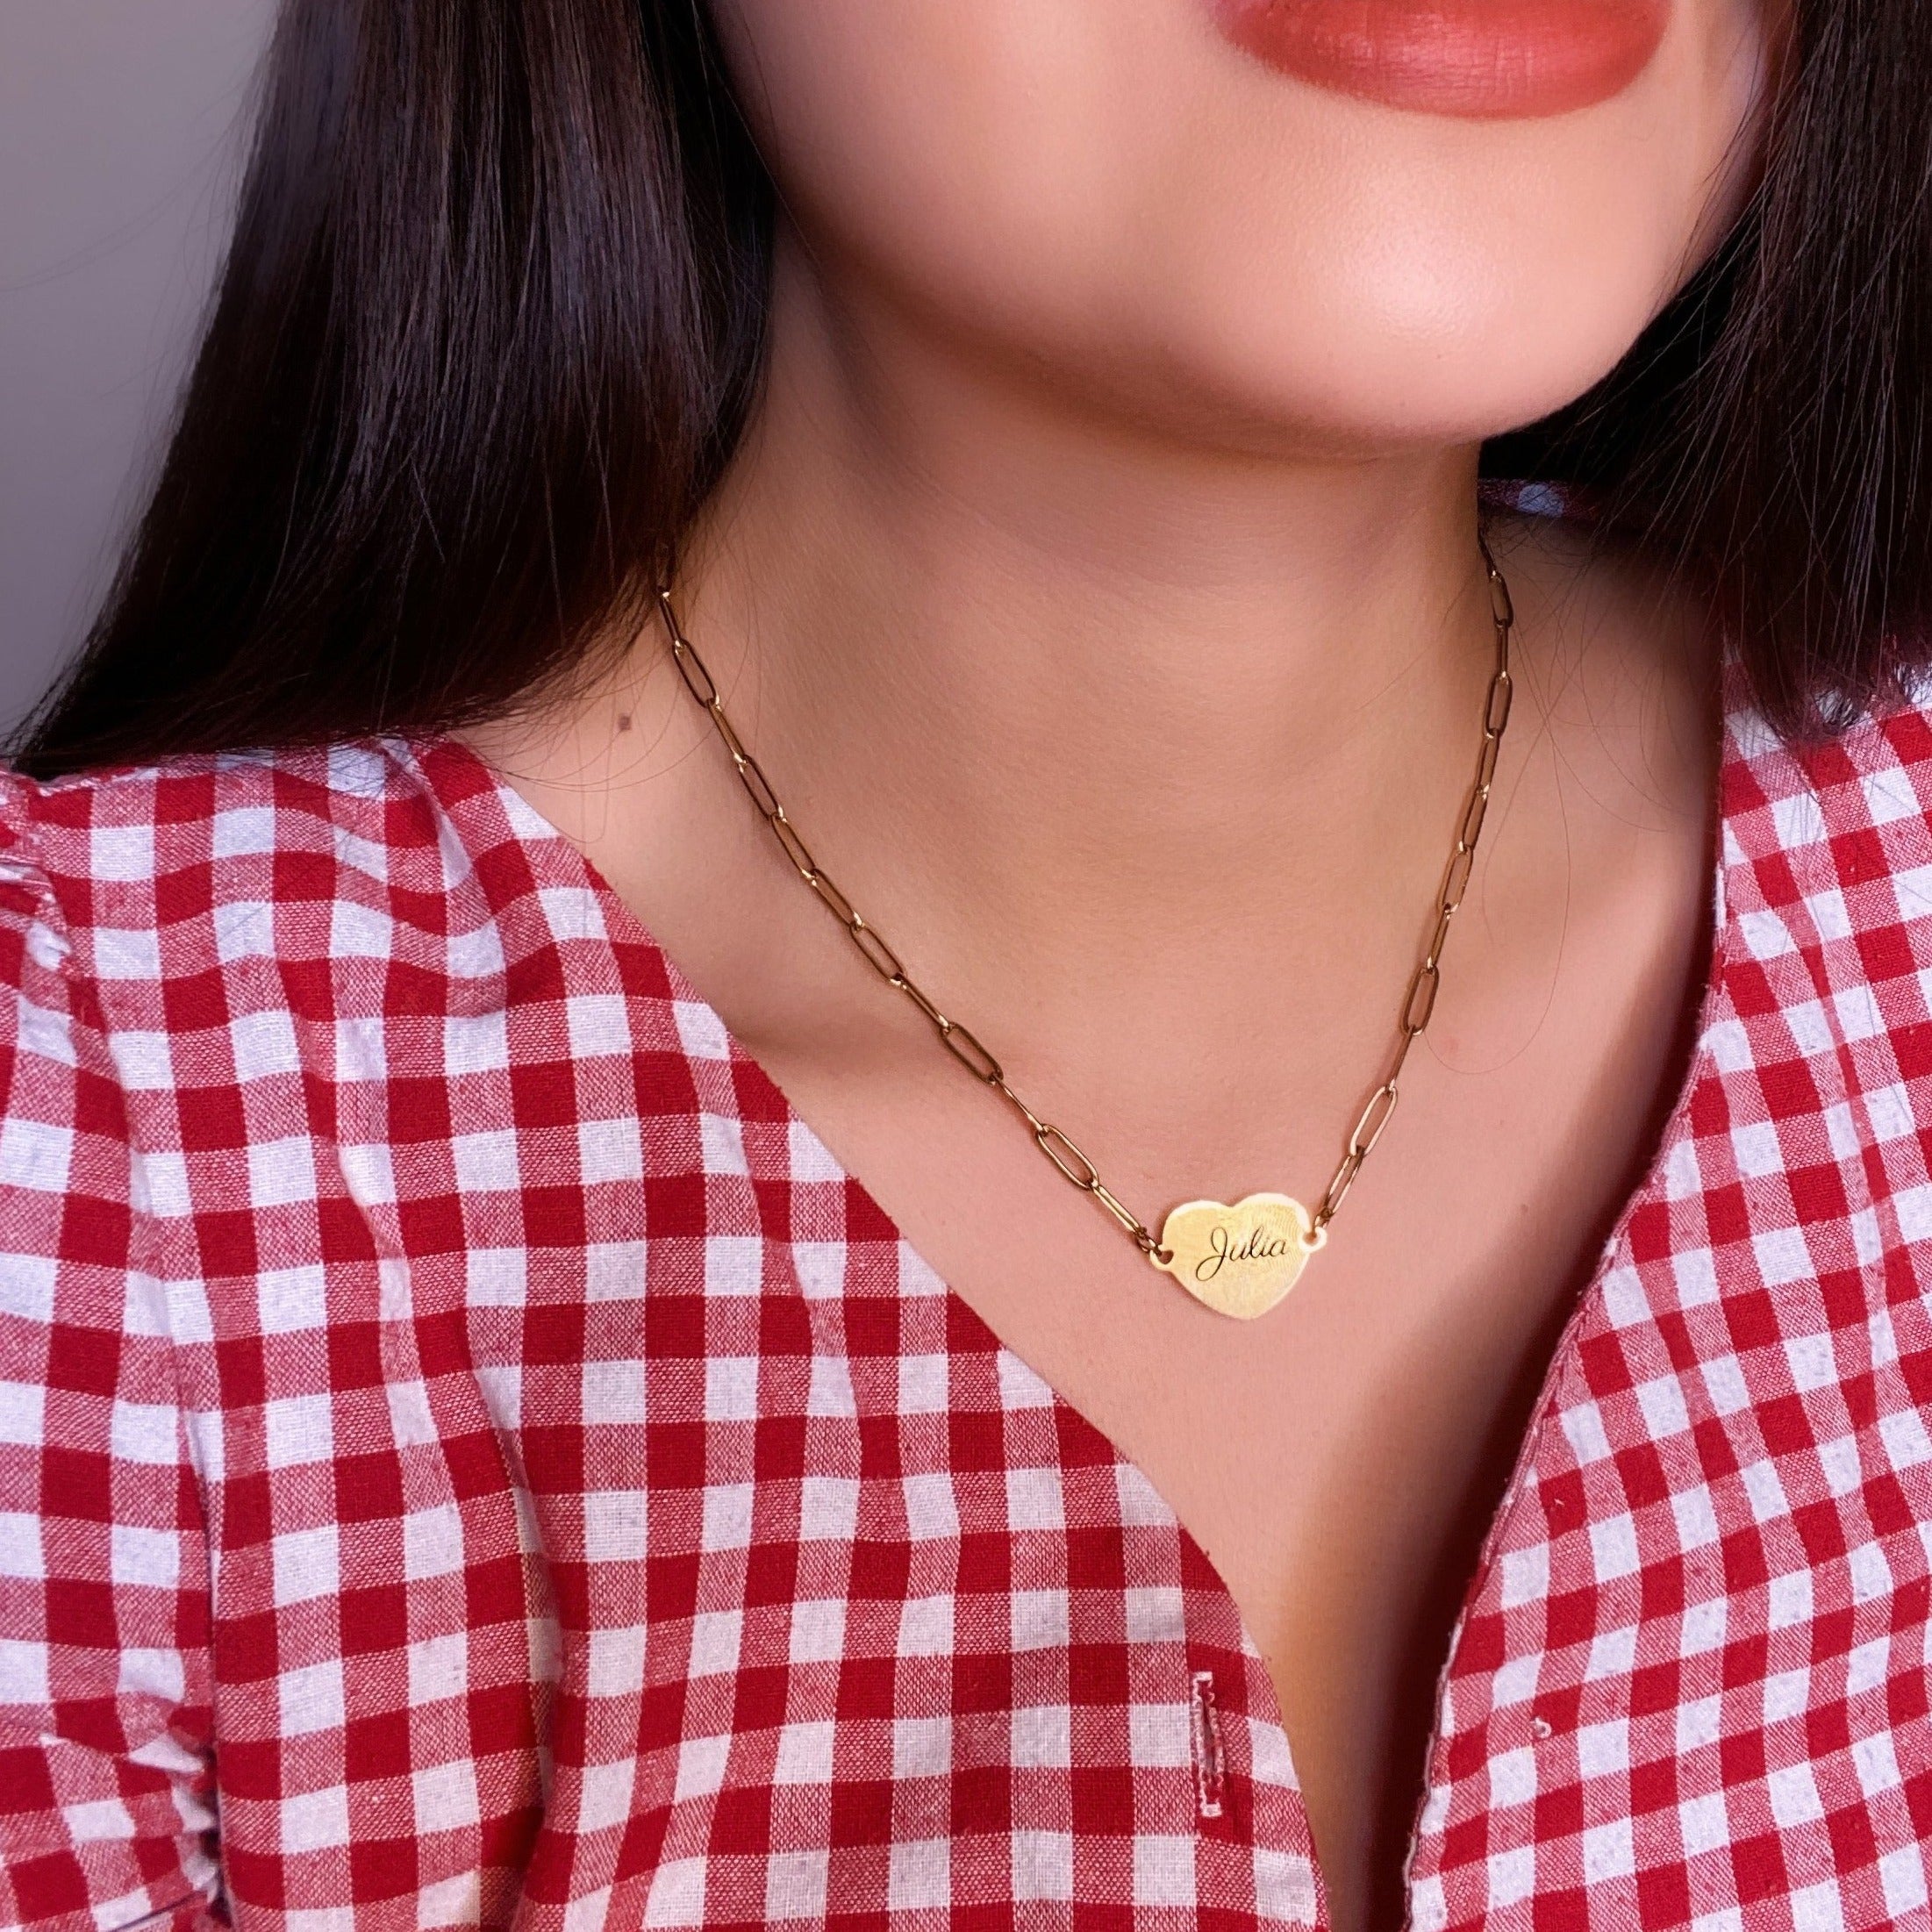 Lazer Engraved Heart Necklace with Paperlink Chain